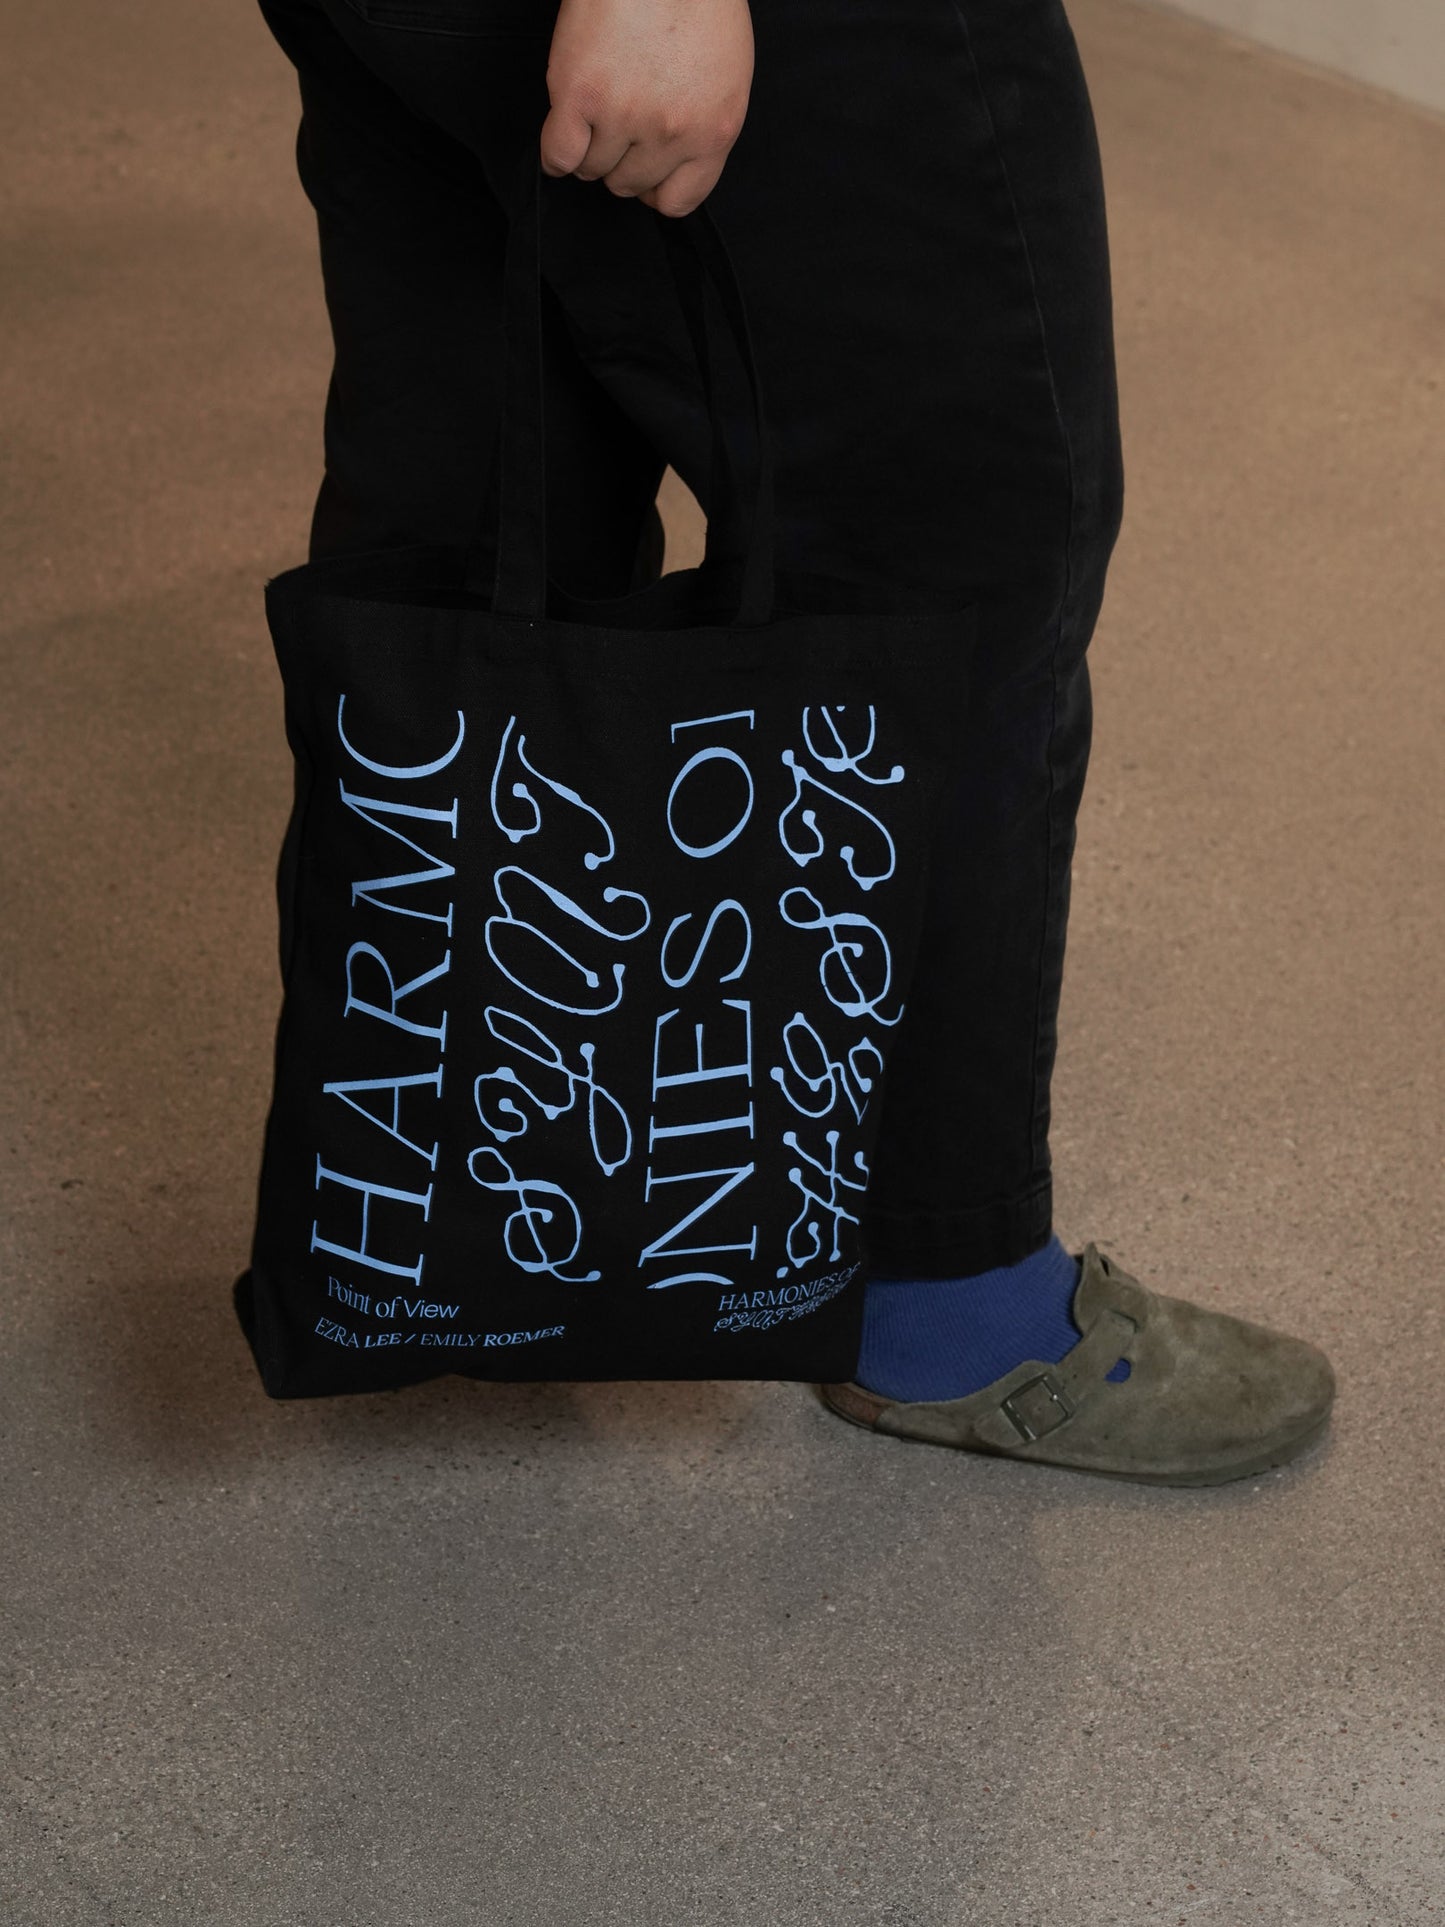 Harmonies of Synthesis Show Tote Bag